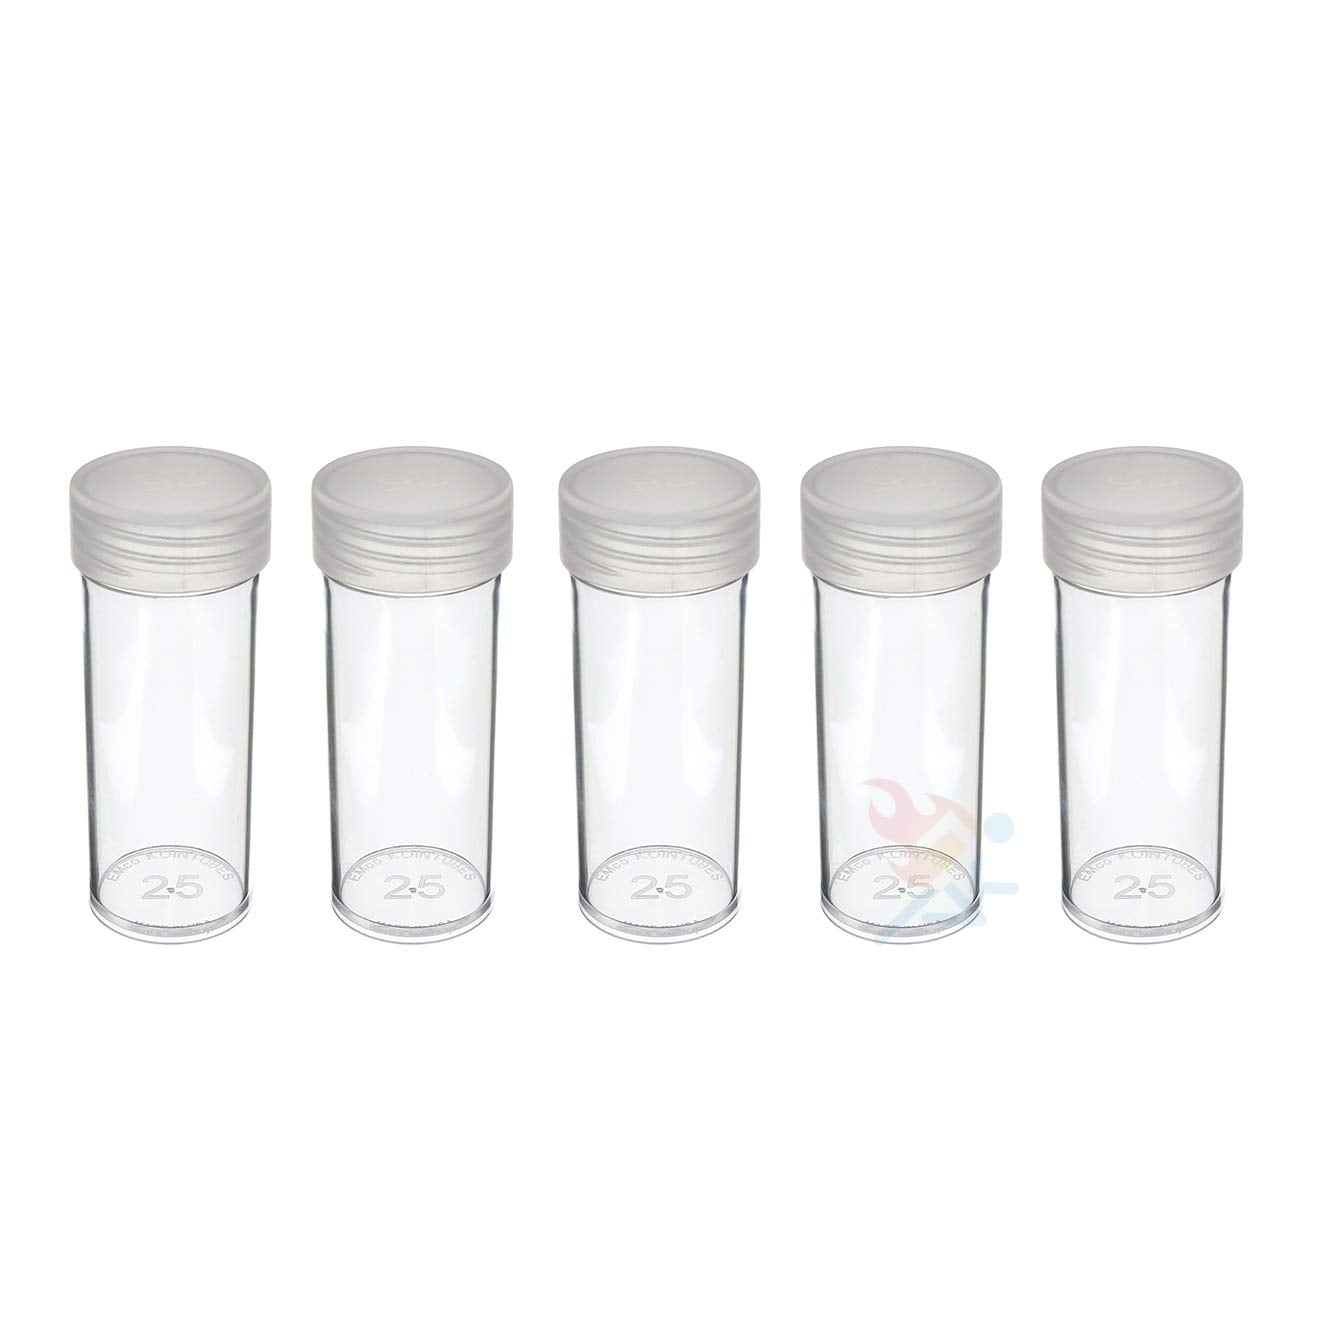 Edgar Marcus Brand Round Clear Plastic Size Coin Storage Tube Holders with Screw on Lid 5 Nickel 